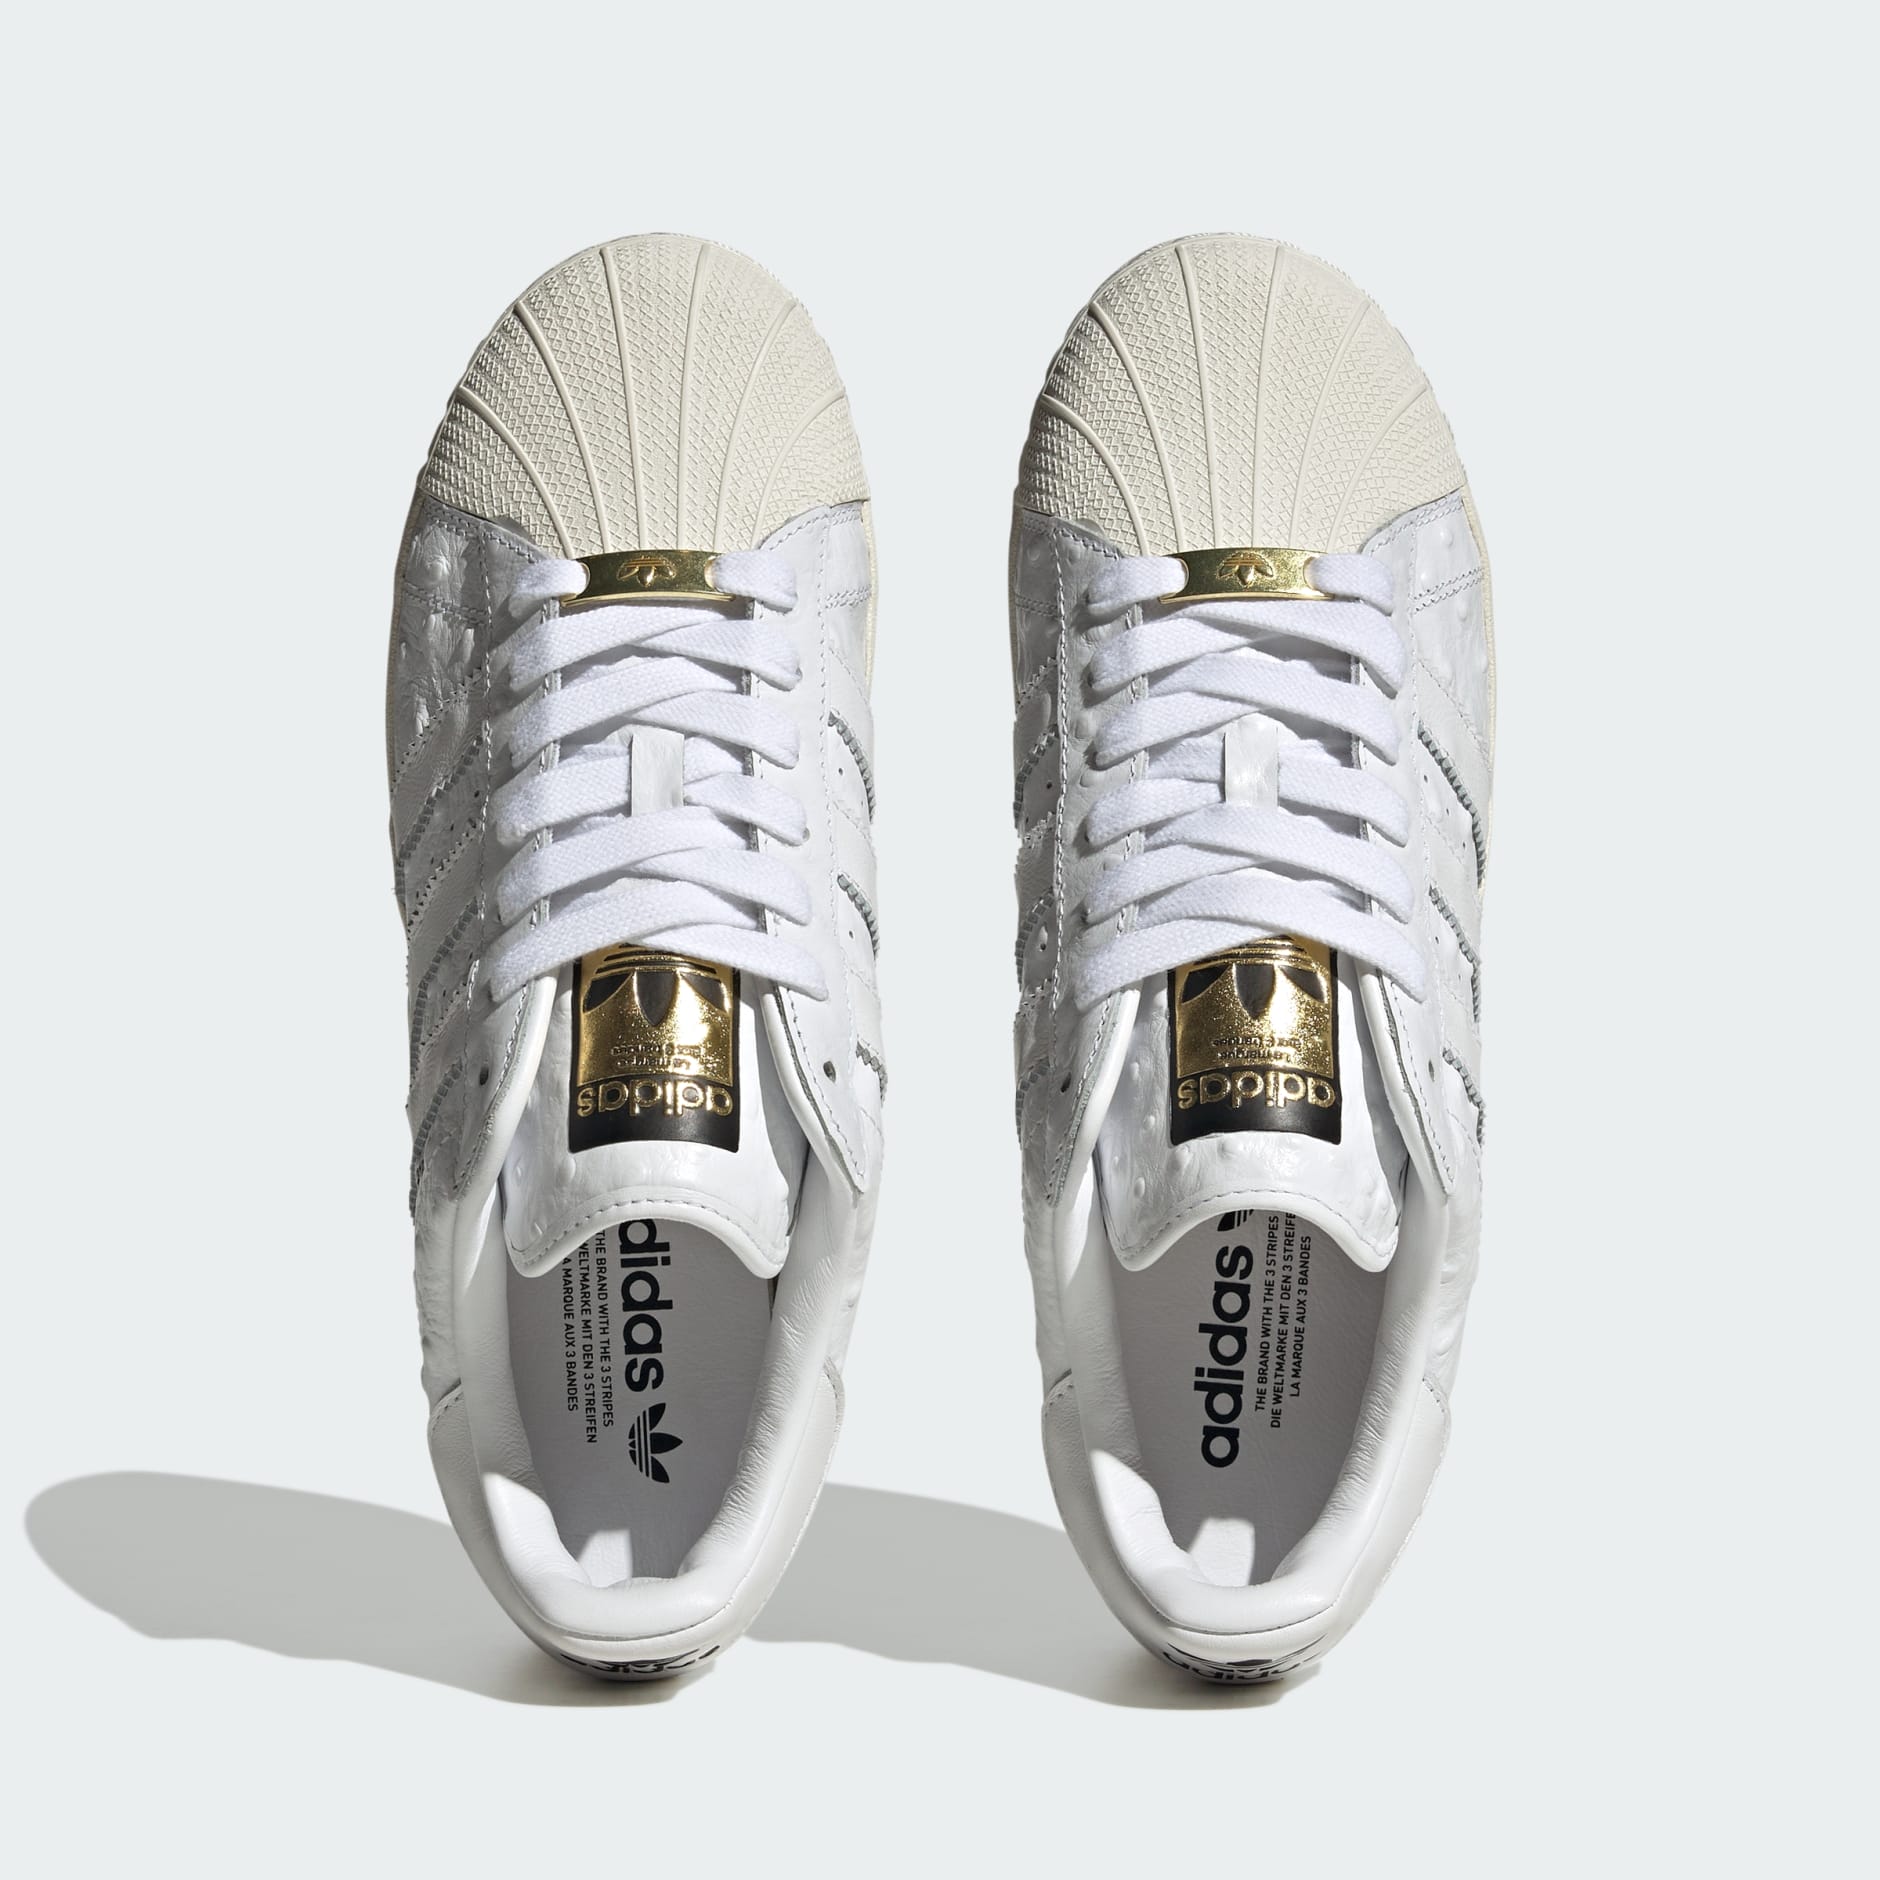 Shoes - Superstar XLG Shoes - White | adidas Oman